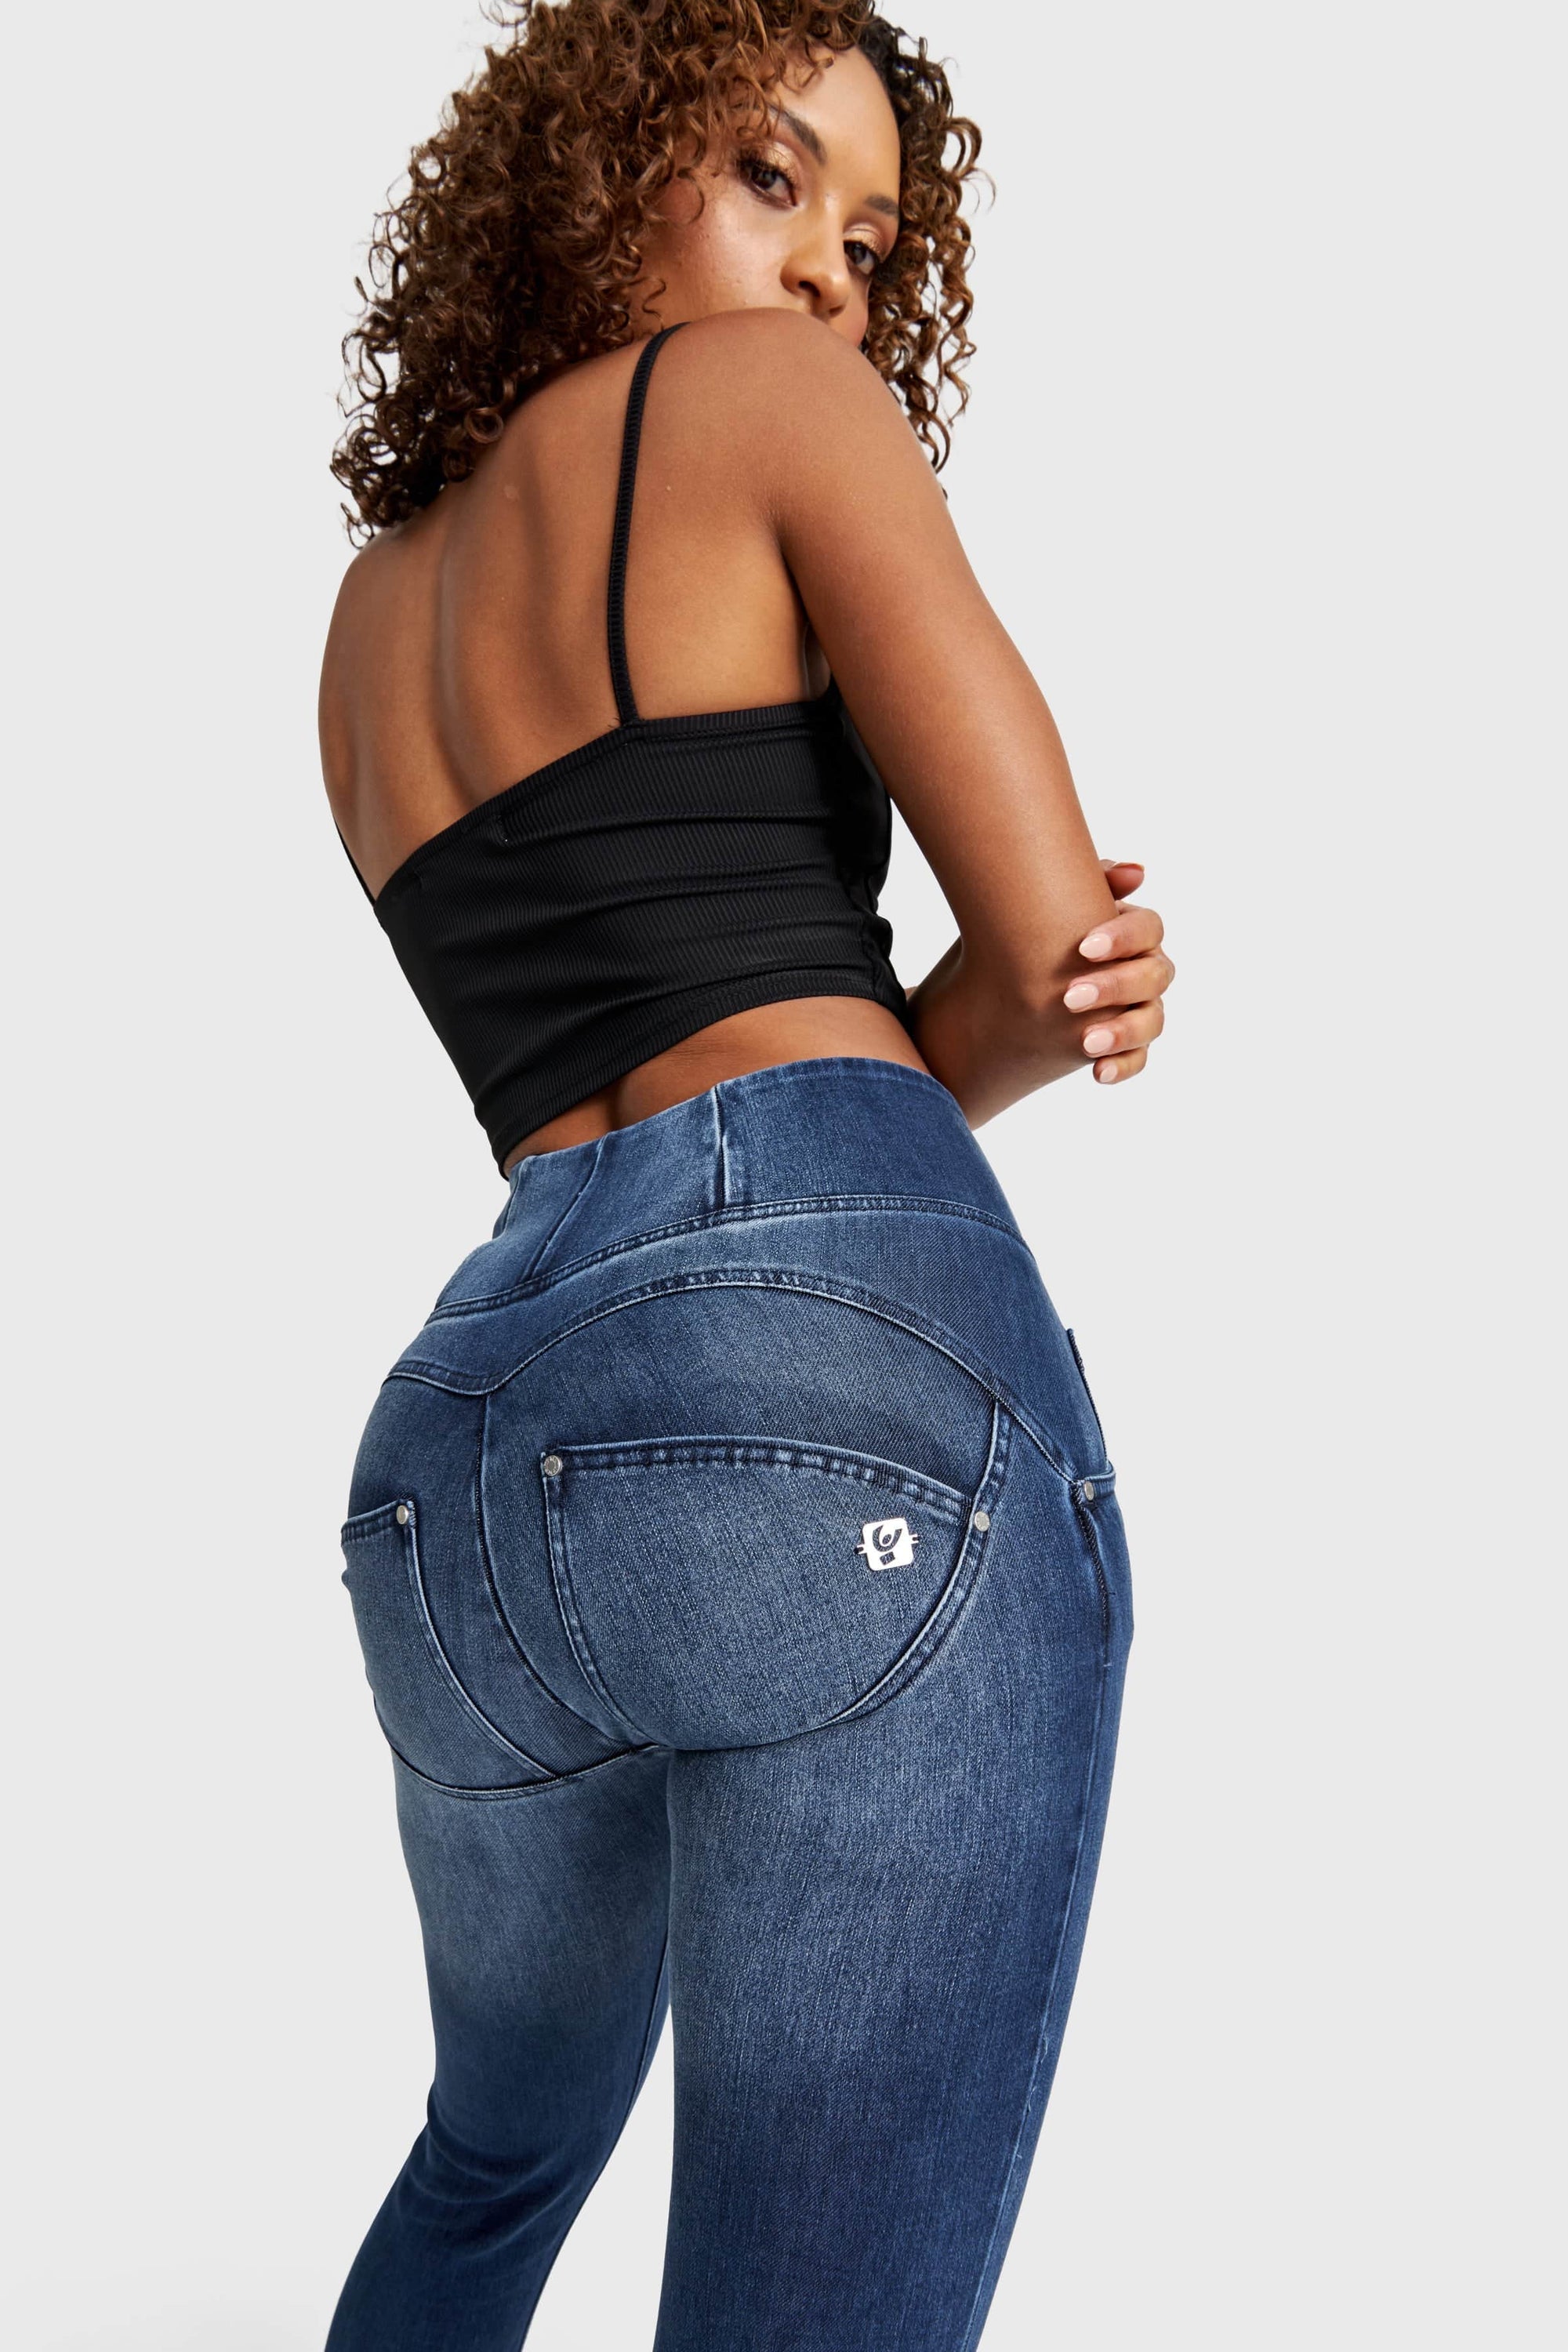 WR.UP® Snug Distressed Jeans - High Waisted - Full Length - Dark Blue + Blue Stitching 2